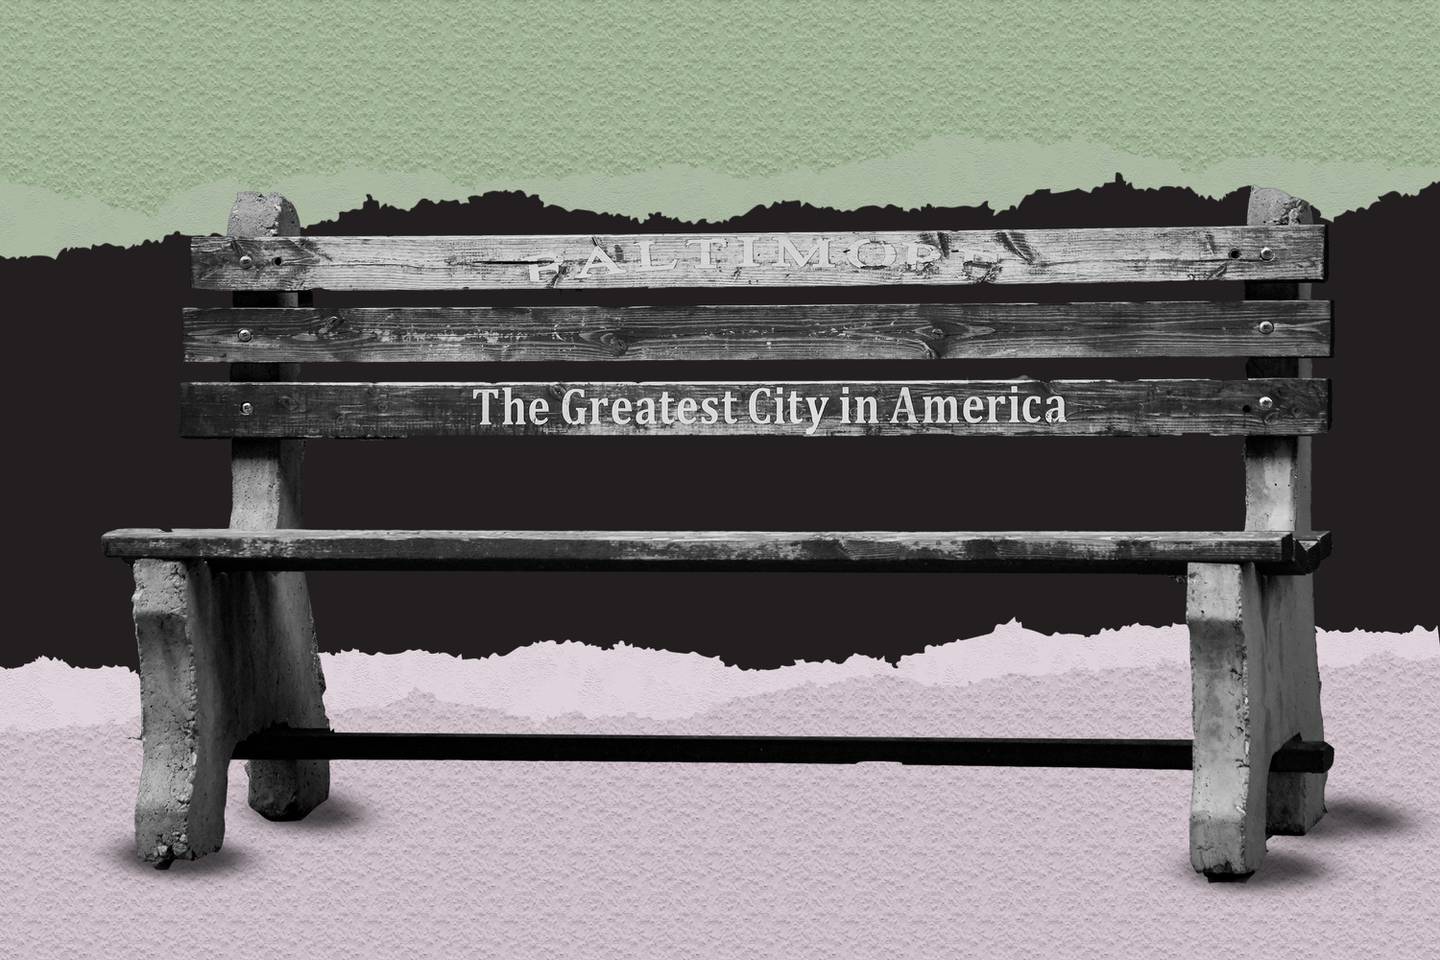 Baltimore, The Greatest City in America bench